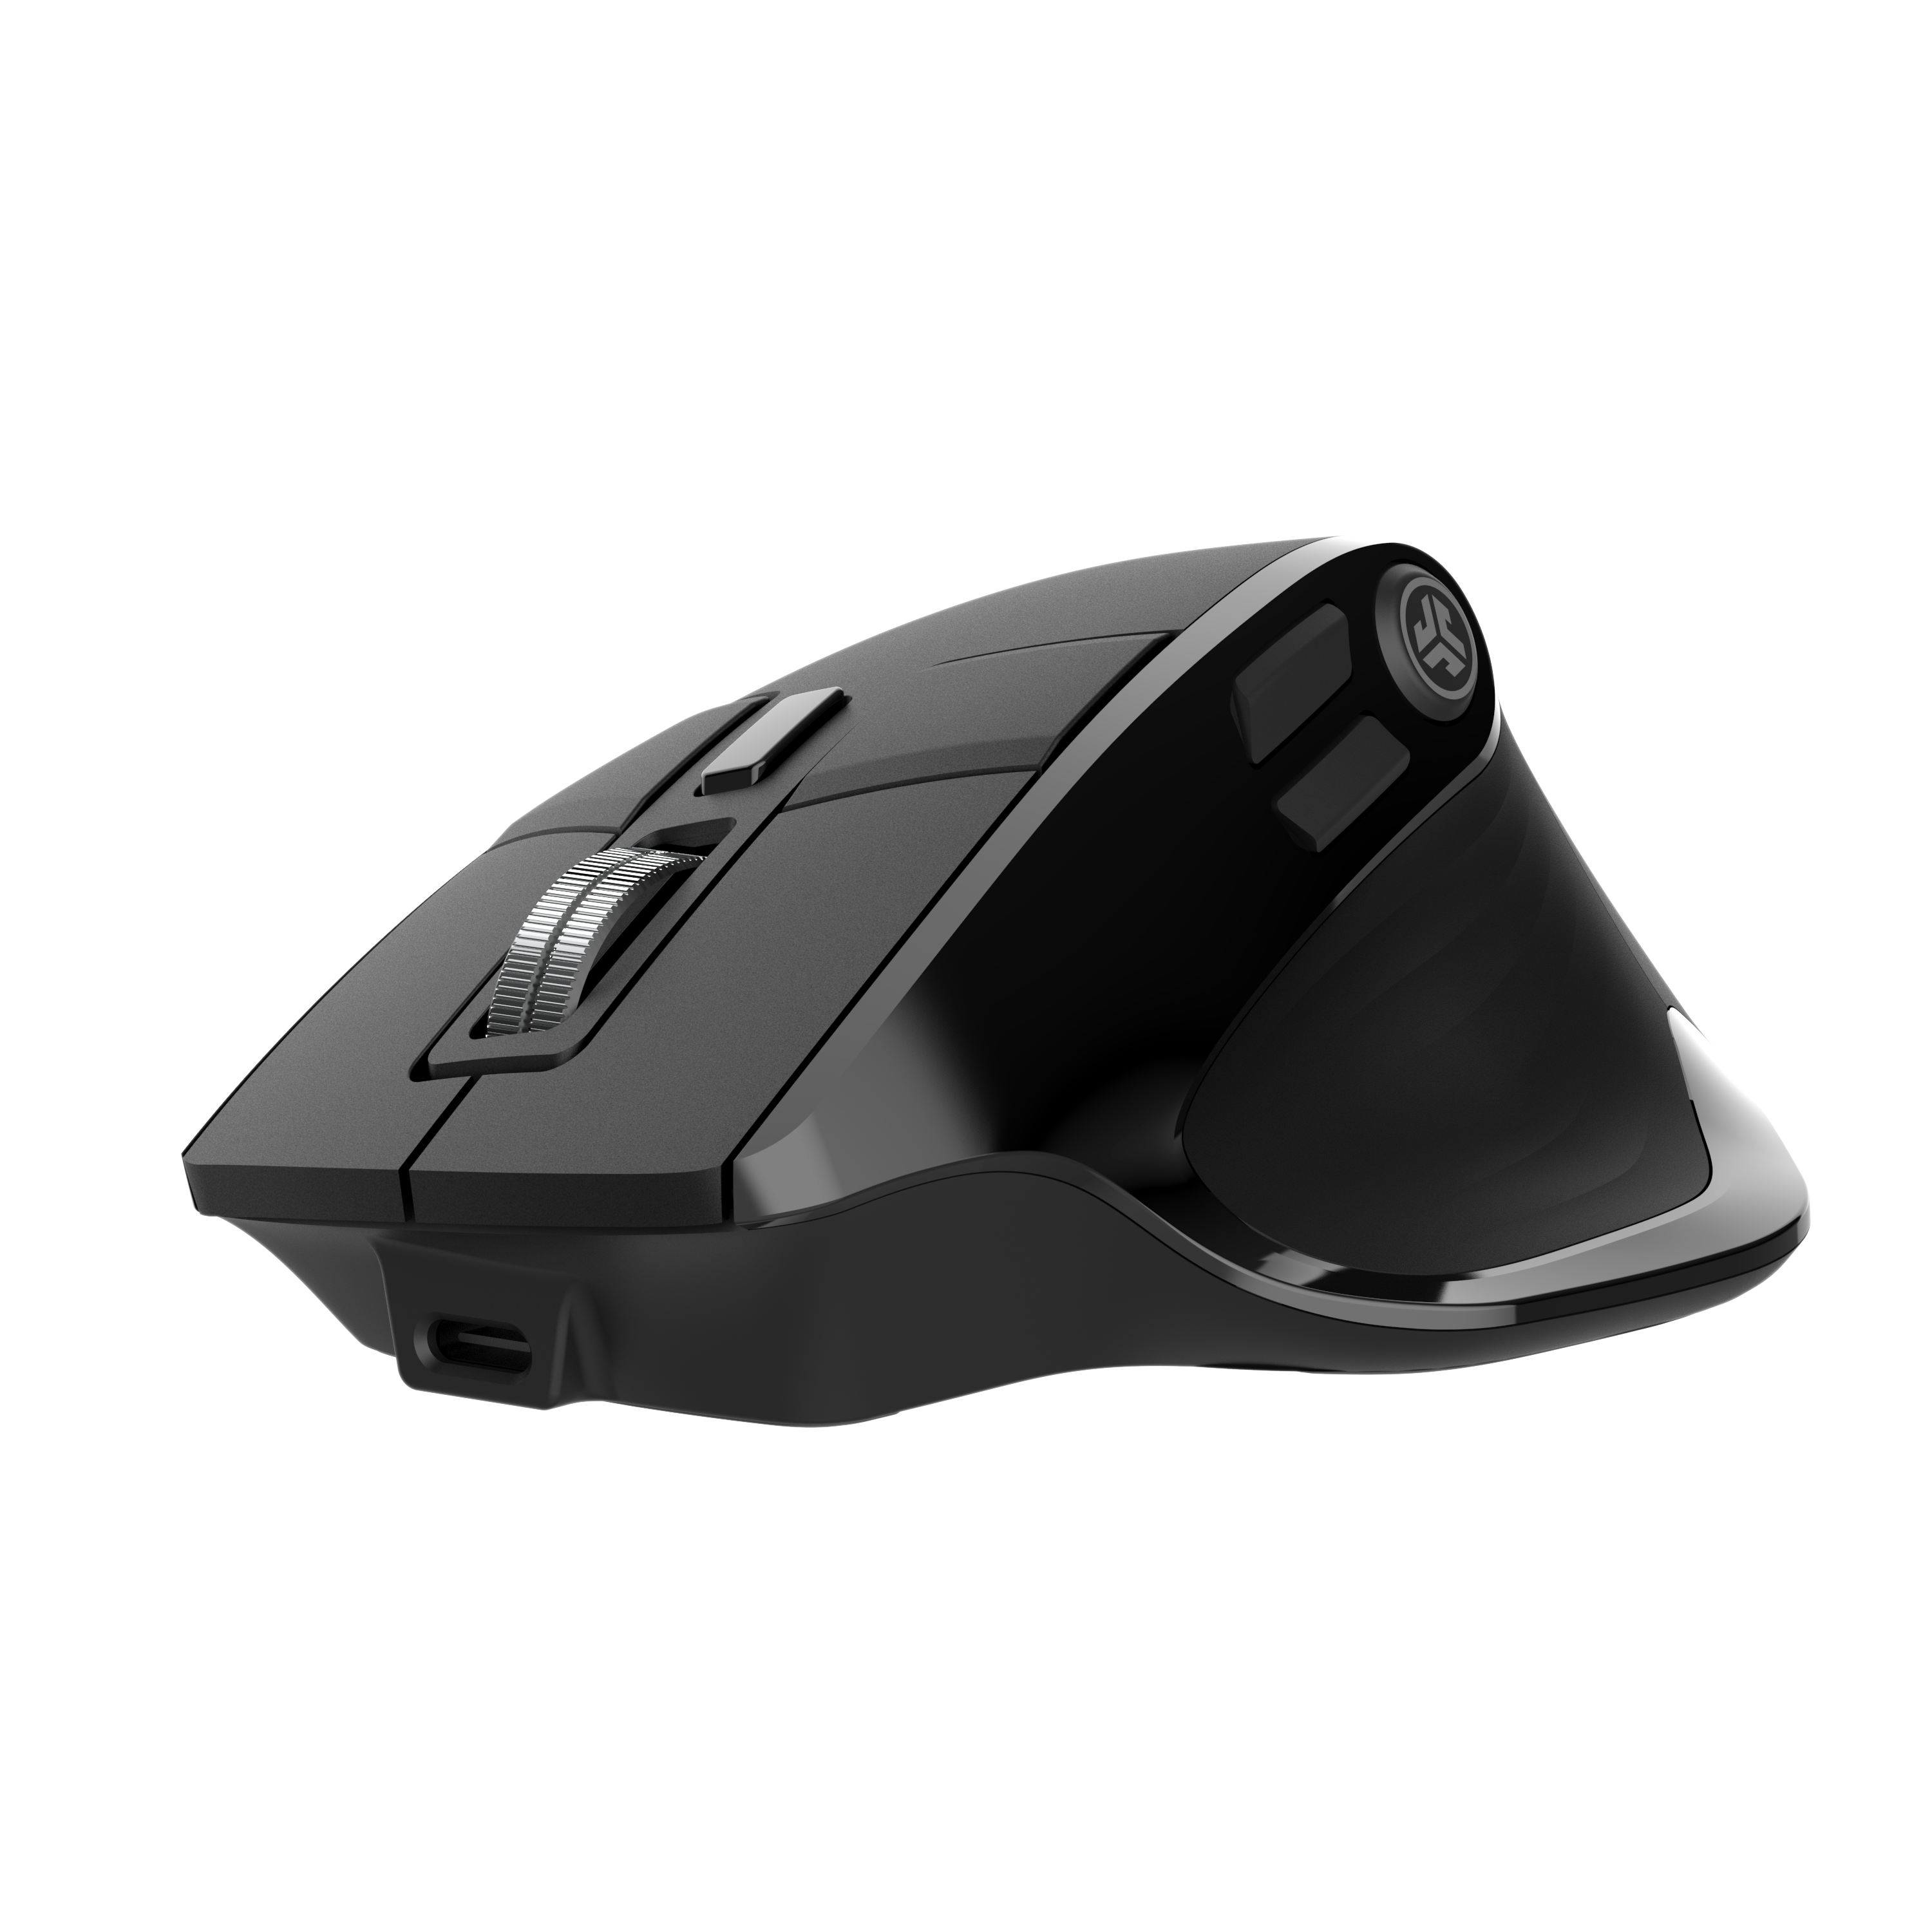 Logitech MX Master 3 (6 stores) see best prices now »